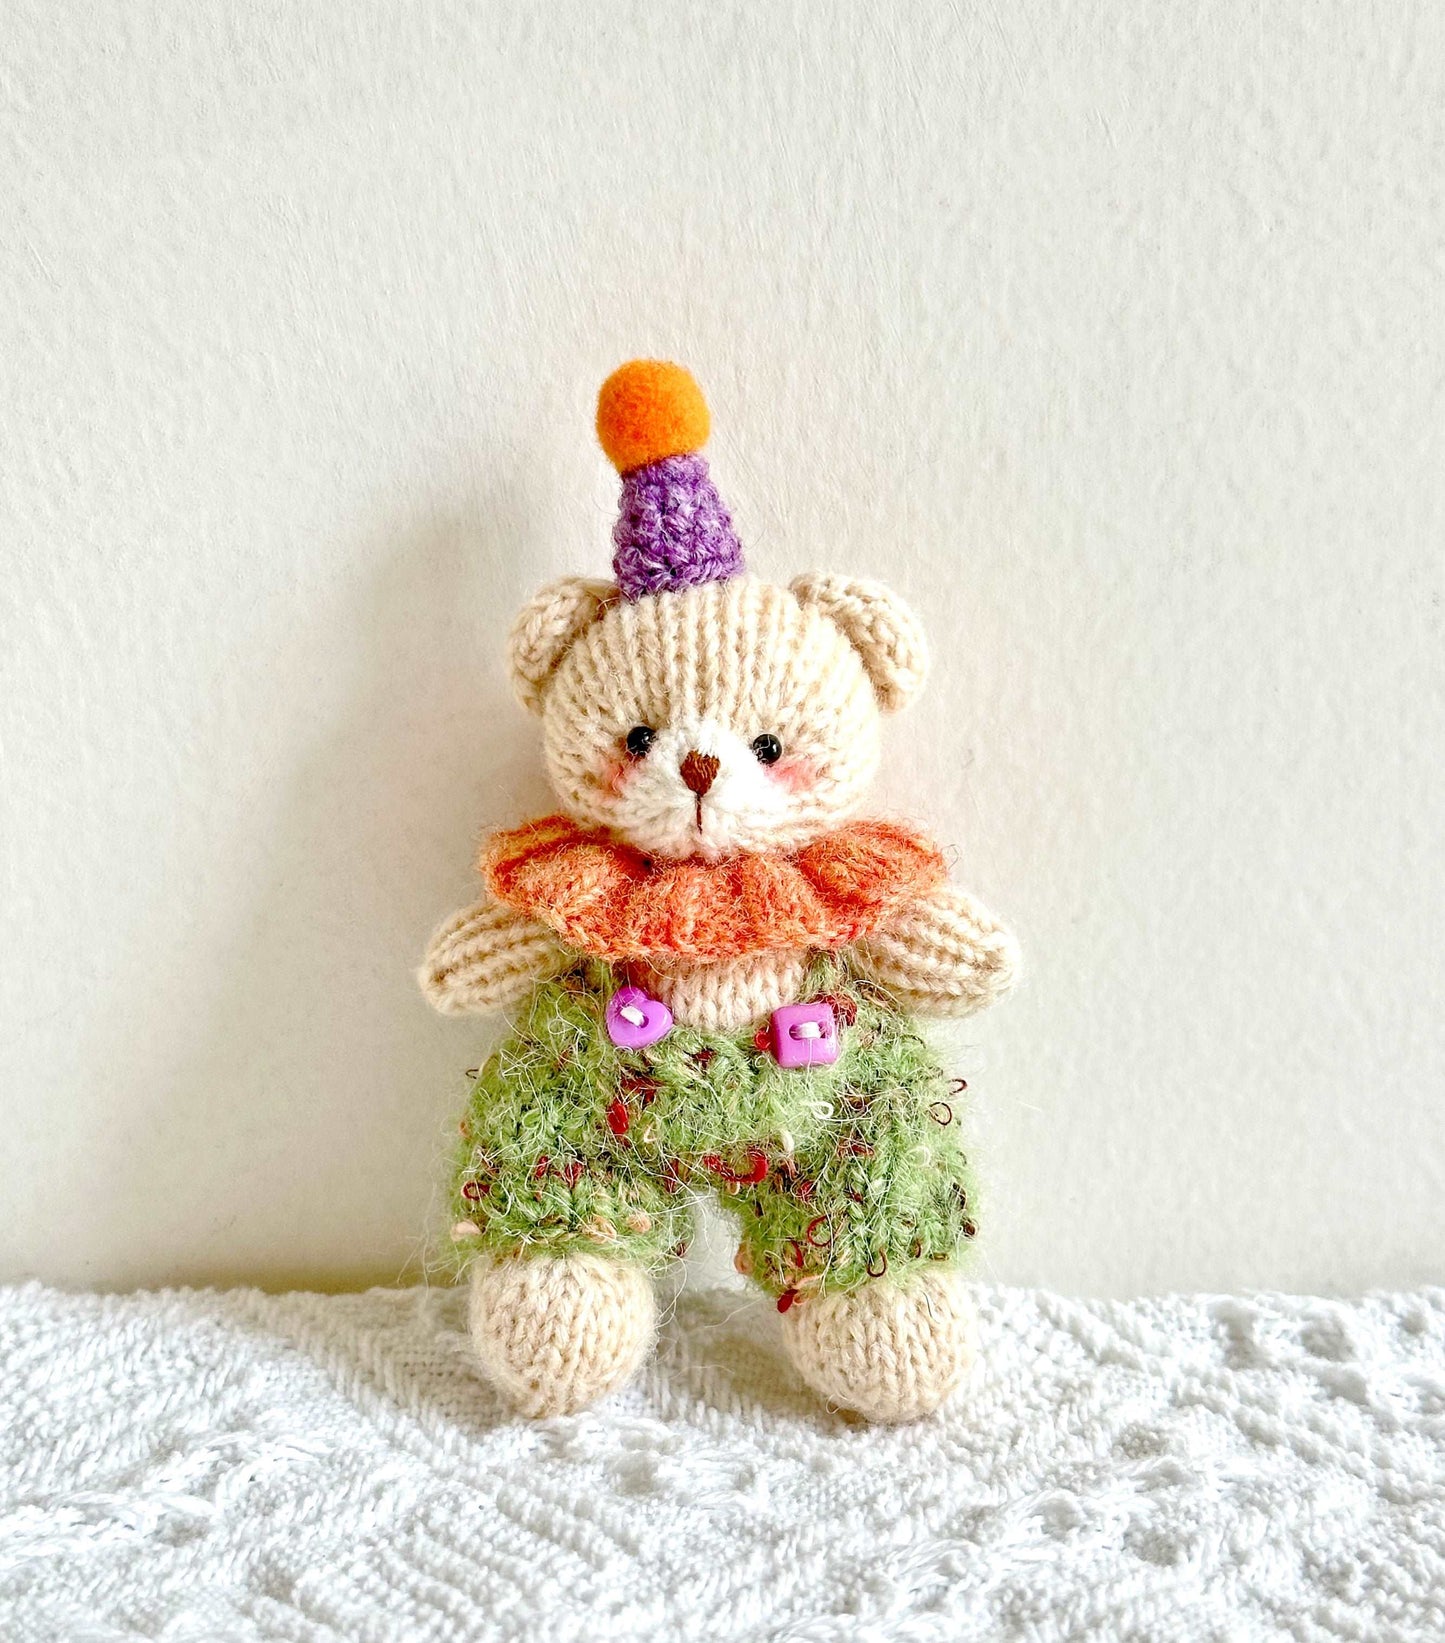 Cute Handmade Crochet Teddy Bear Toy for Gifting and Wearable Pin